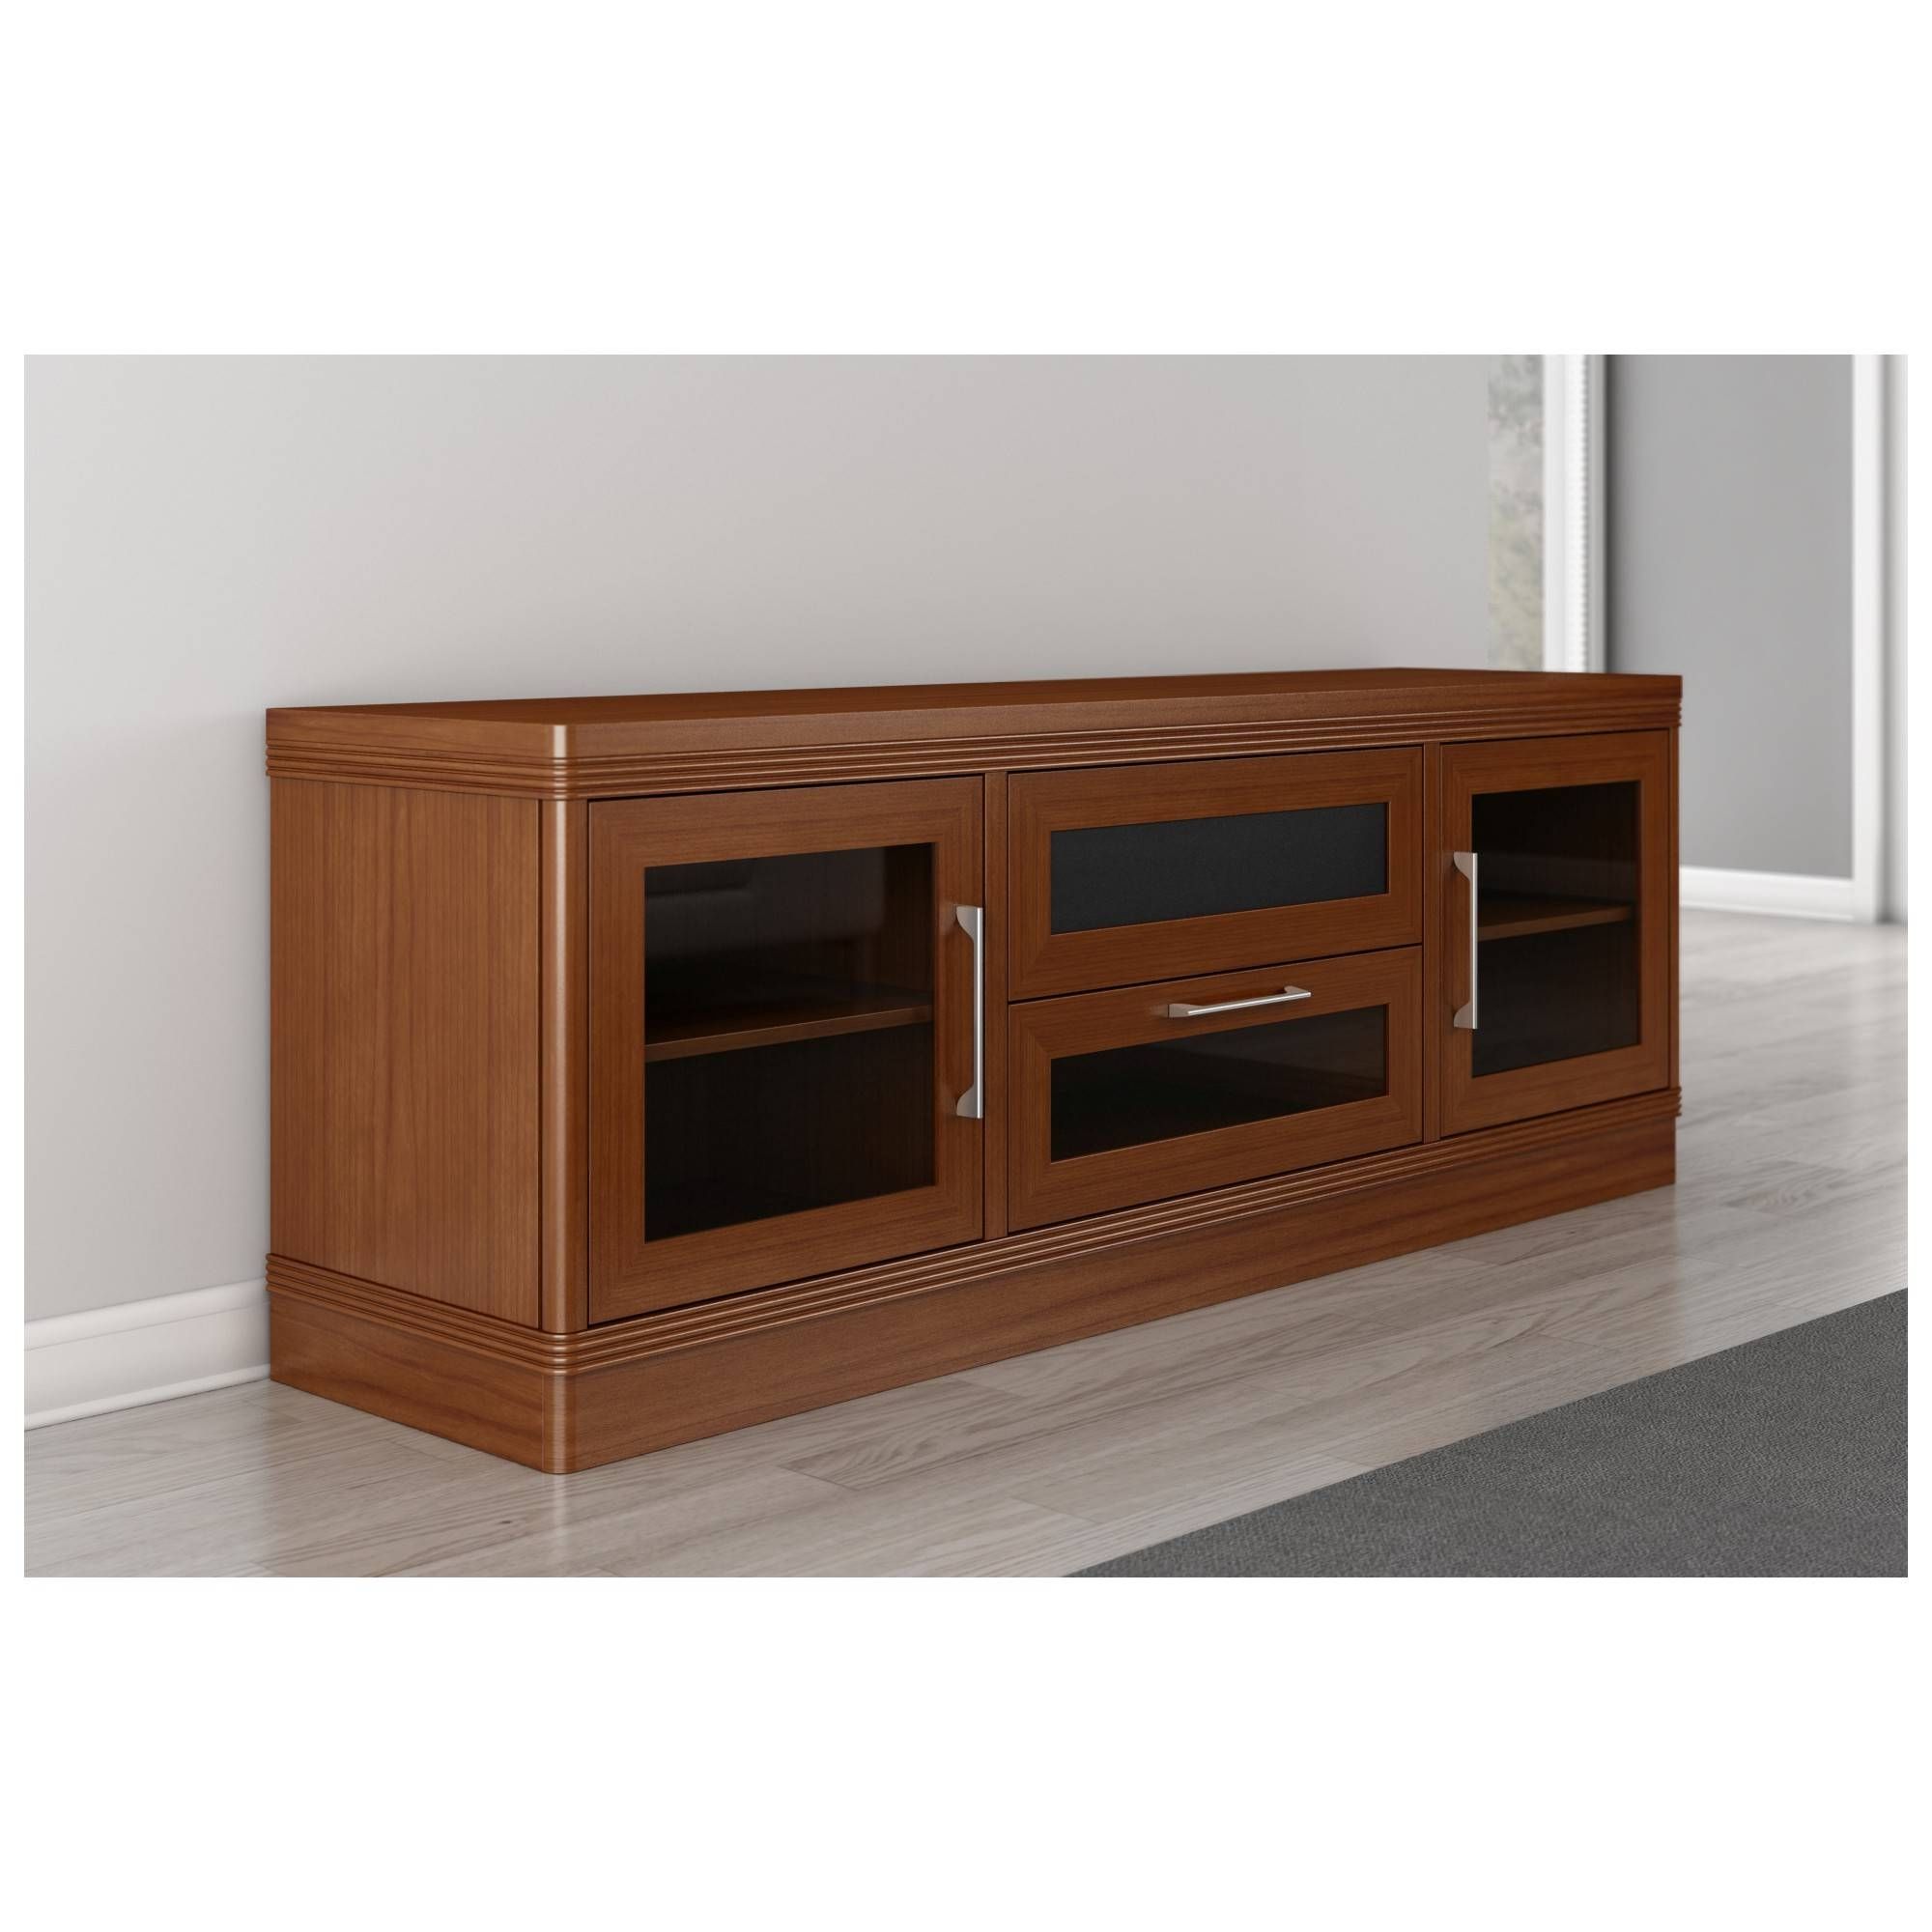 Furnitech Ft72trlc 70" Tv Stand Traditional Media Cabinet W Throughout Light Cherry Tv Stands (View 11 of 15)